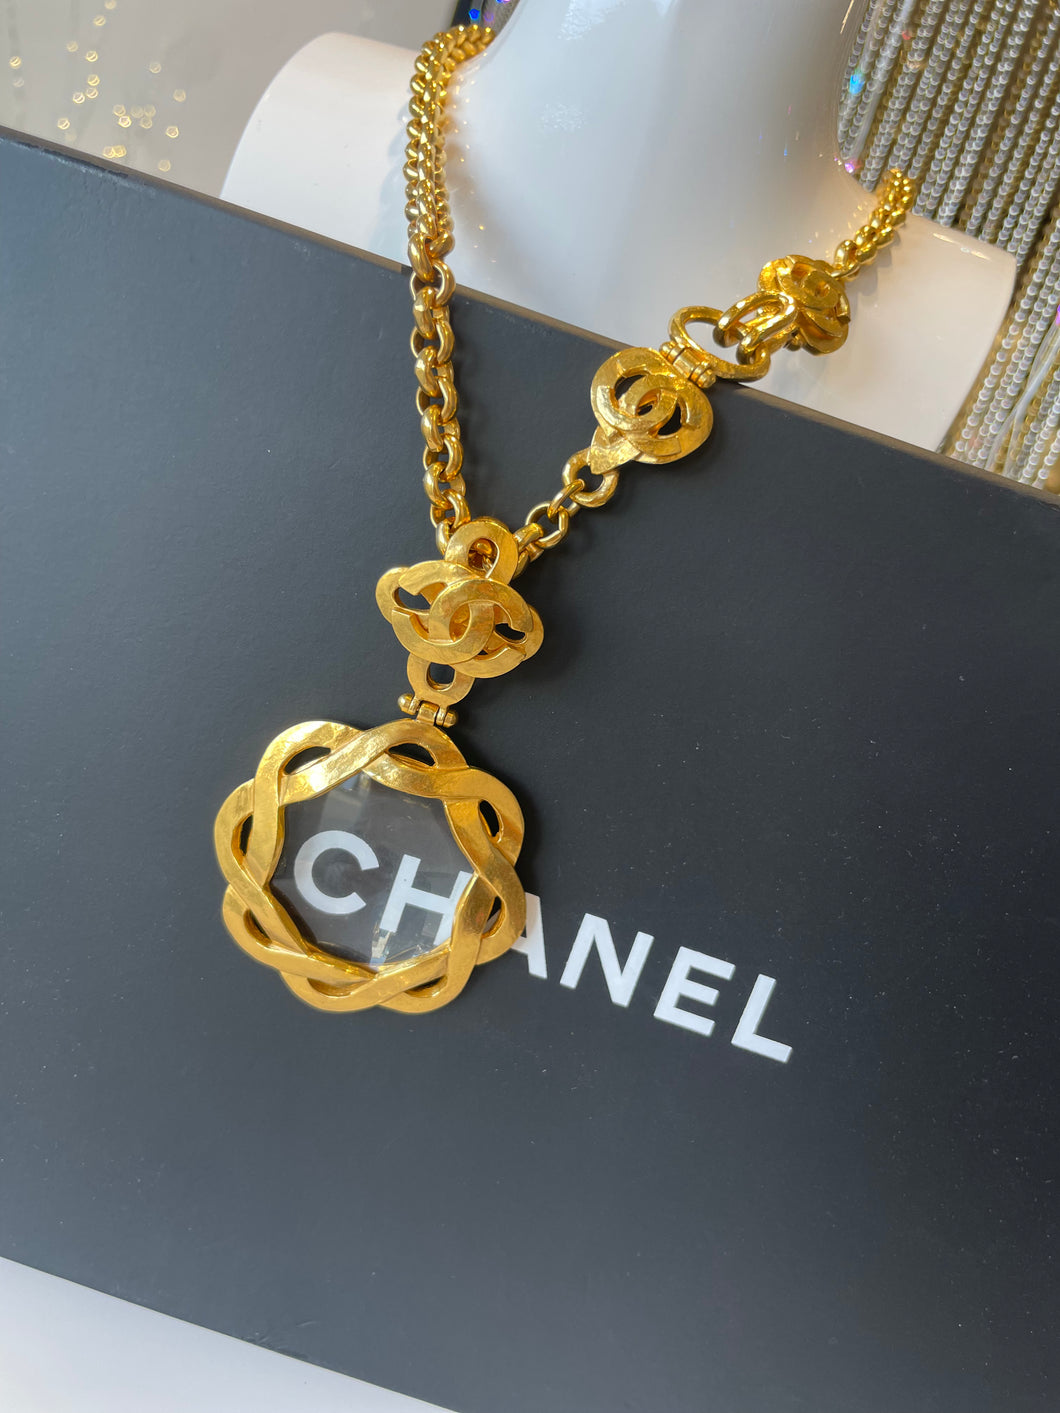 Chanel Magnifier Necklace